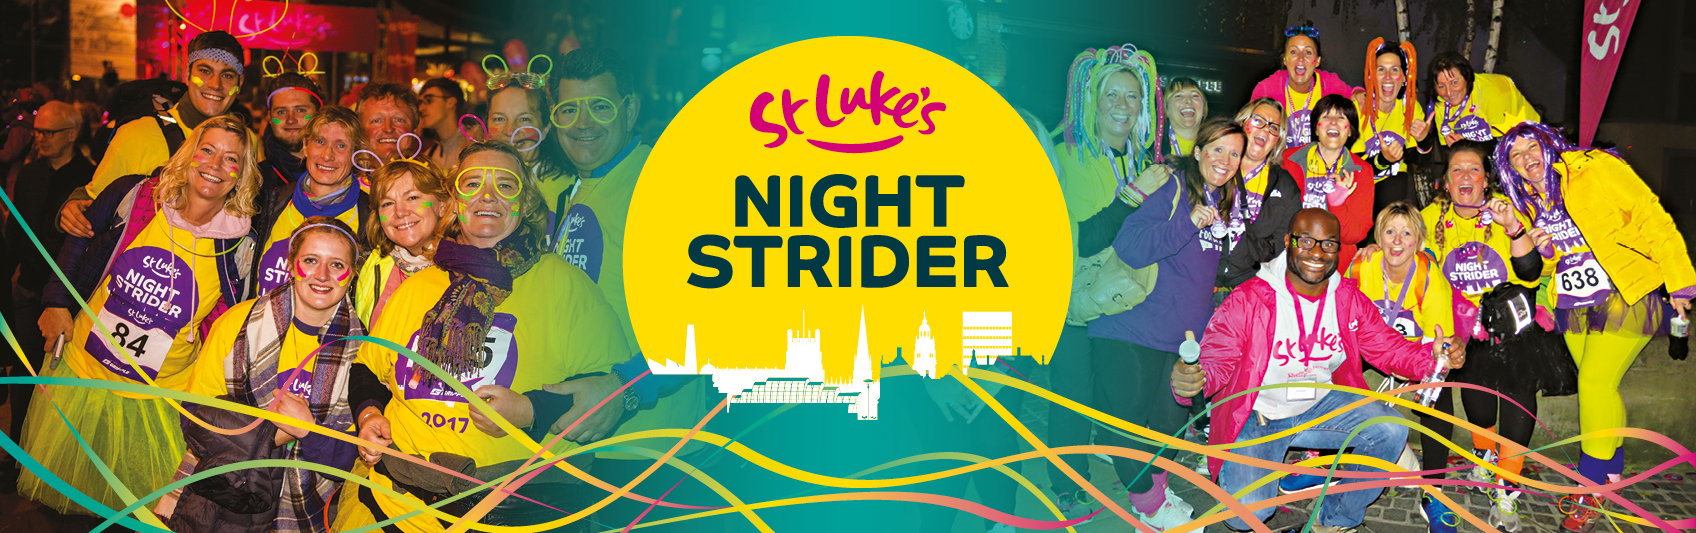 EES Showhire provide event management services to the Sheffield Night Strider charity event on behalf of St Luke's Hospice